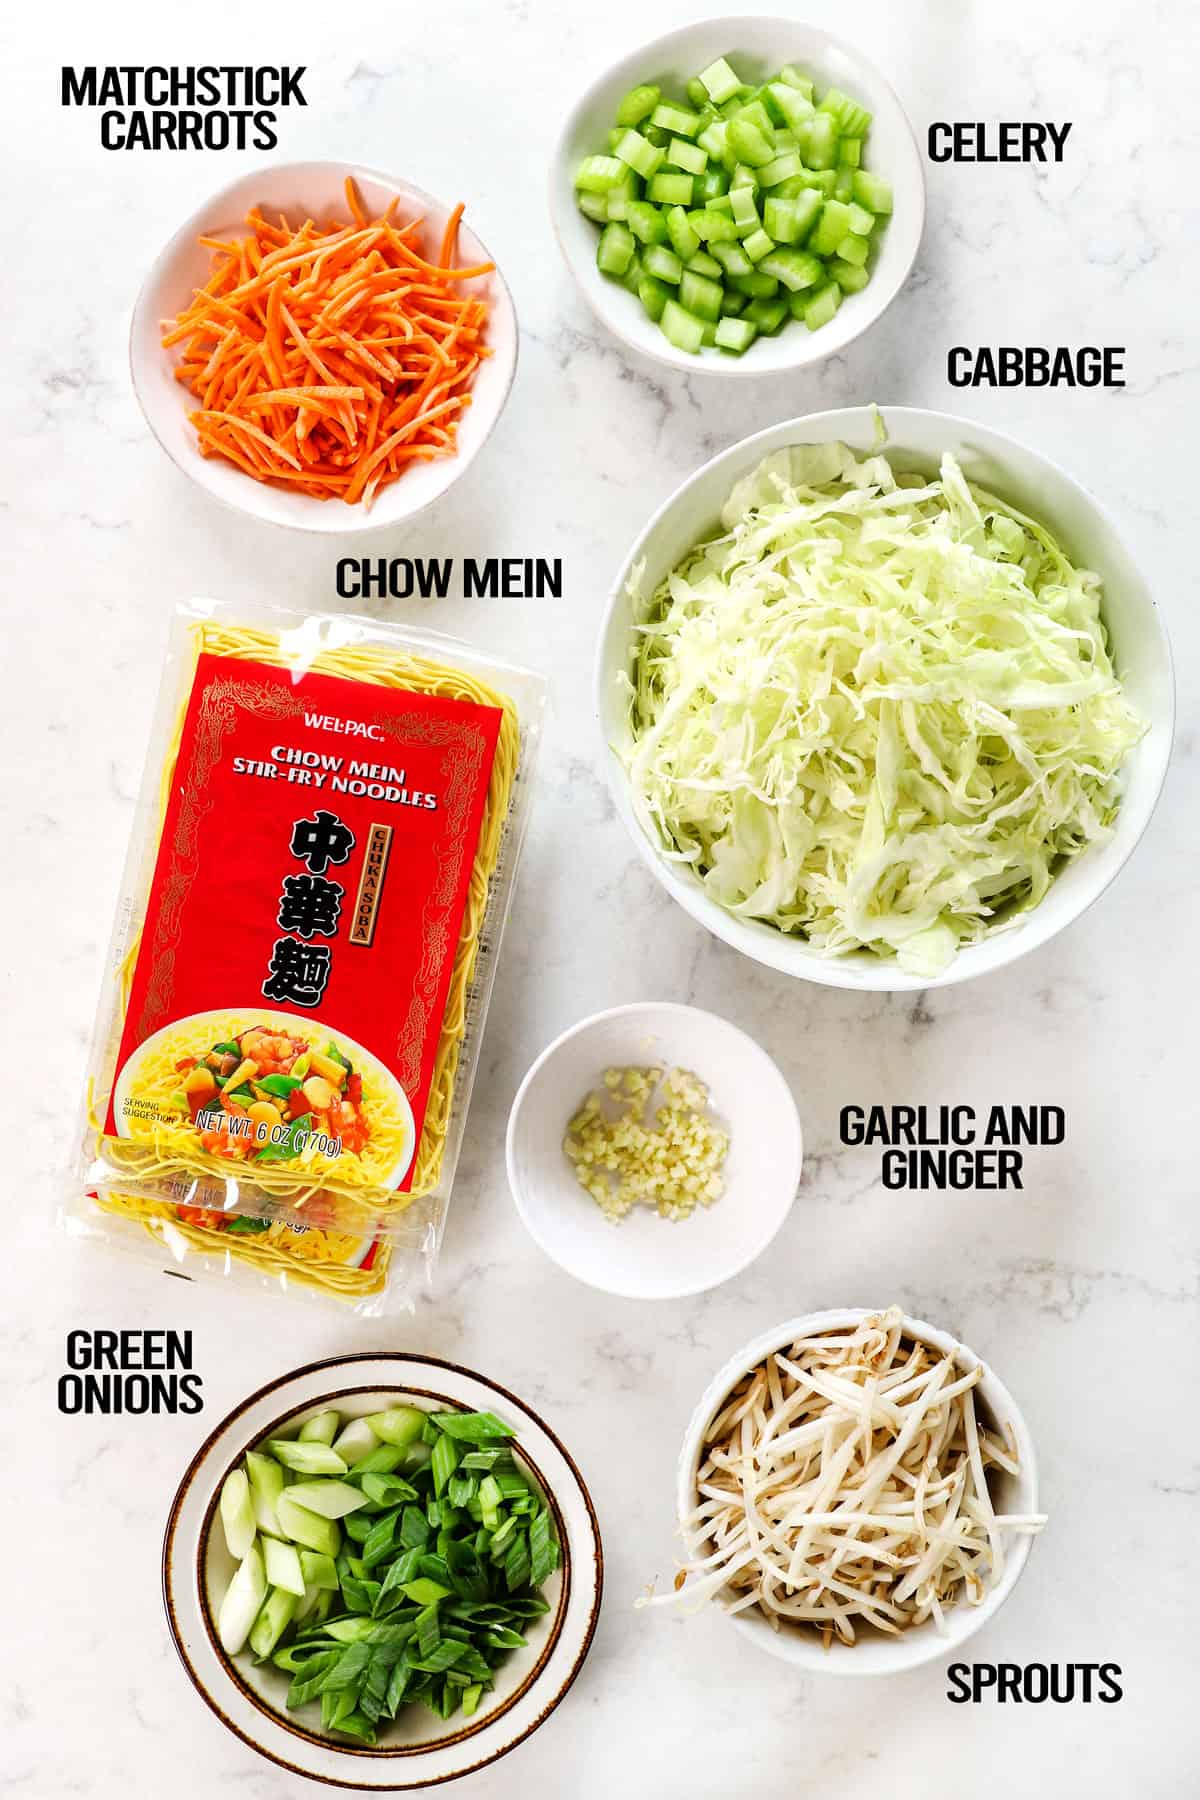 Showing ingredients for chow mein labeled: chow mein noodles, cabbage, carrots, green onions, sprouts, garlic ginger 